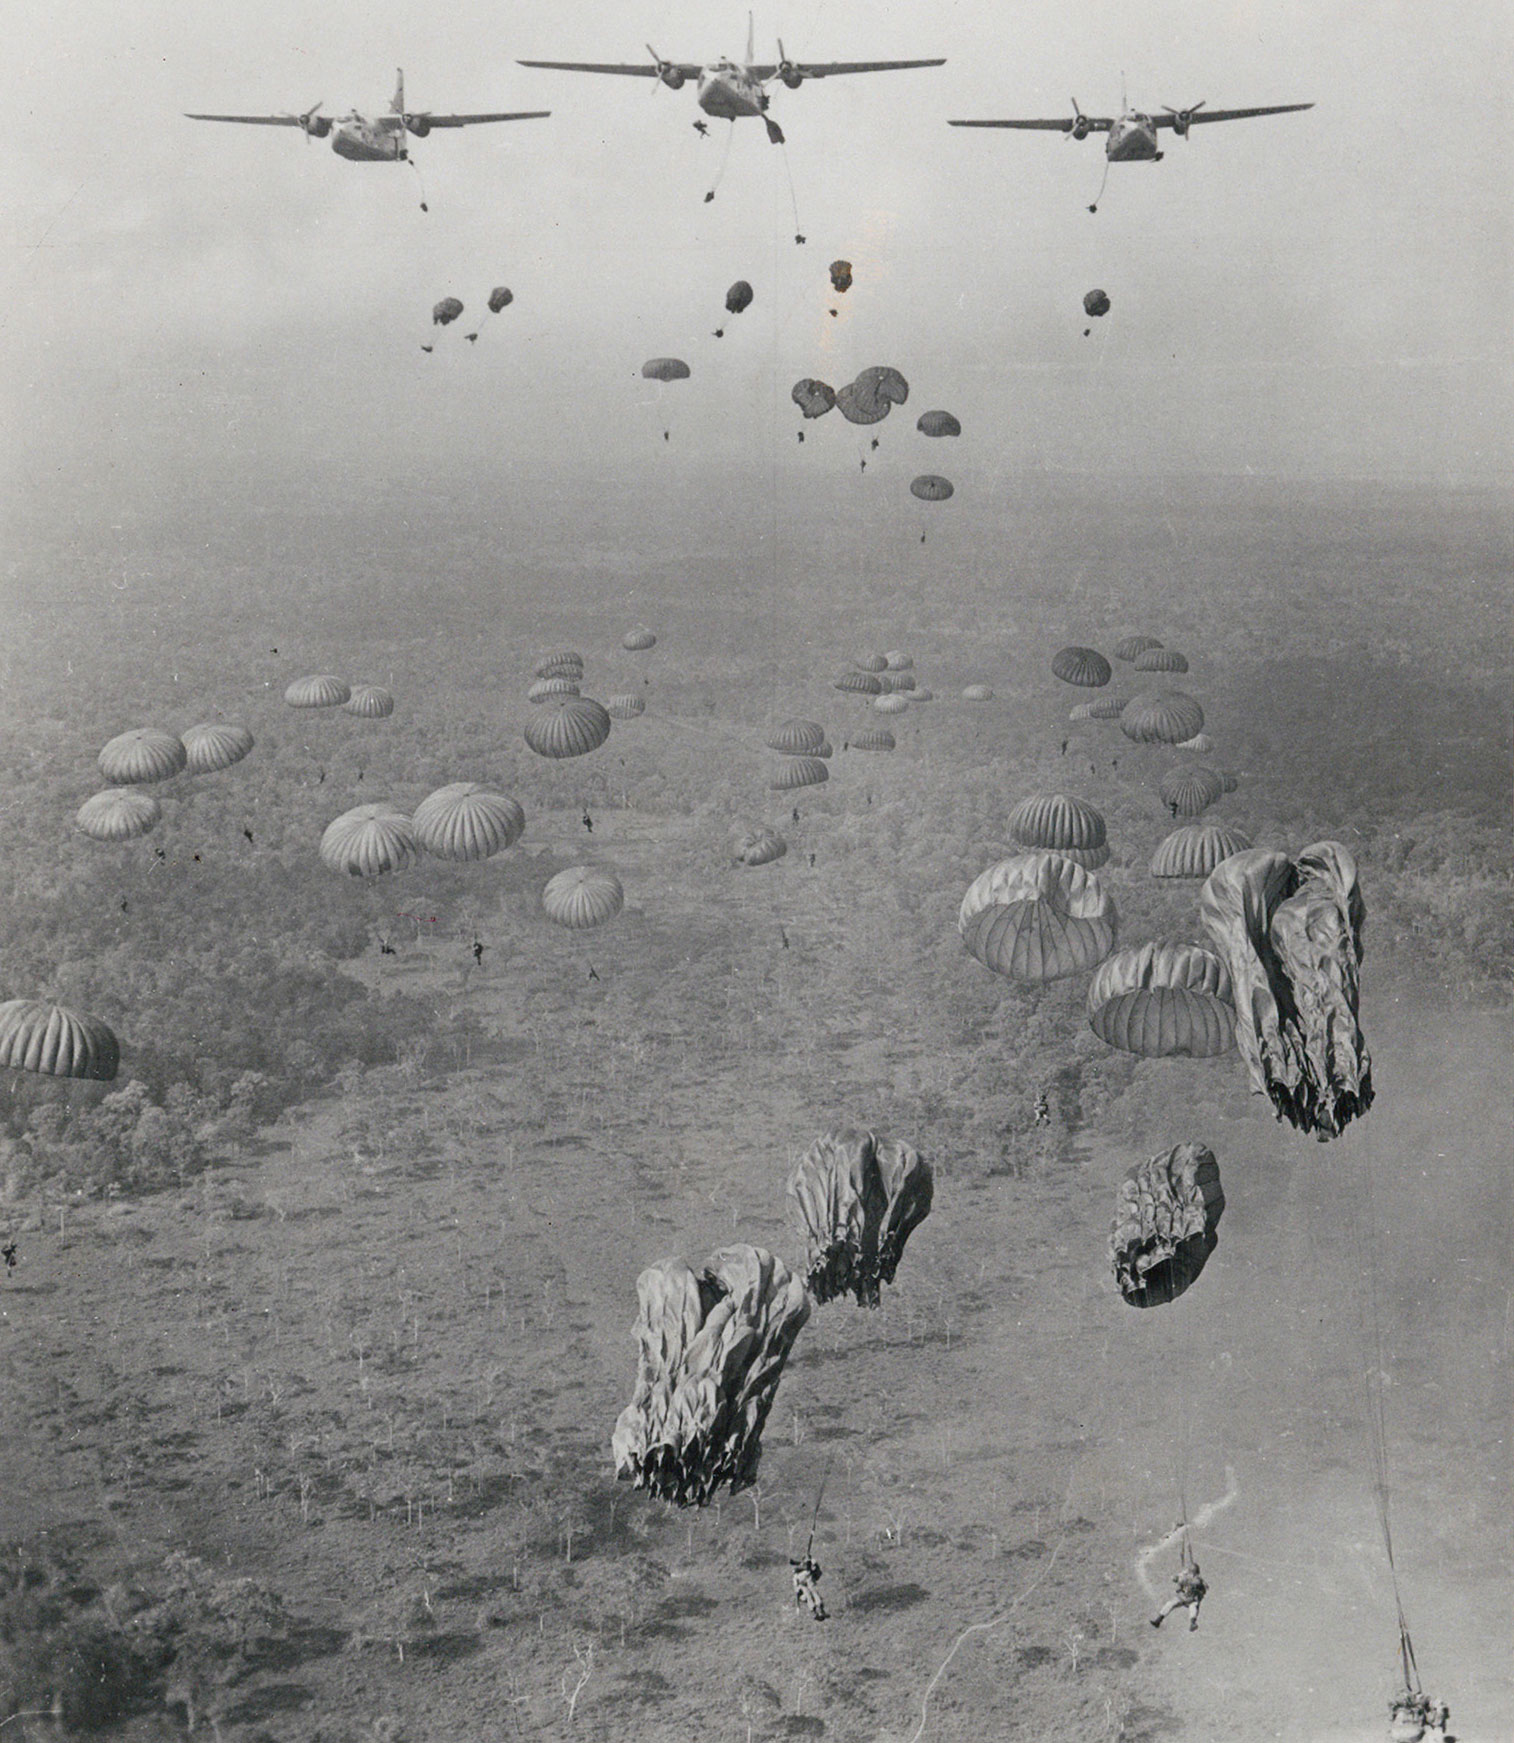 Leroy photographed American paratroopers descending to the ground while she herself swung back and forth under an Army parachute. 